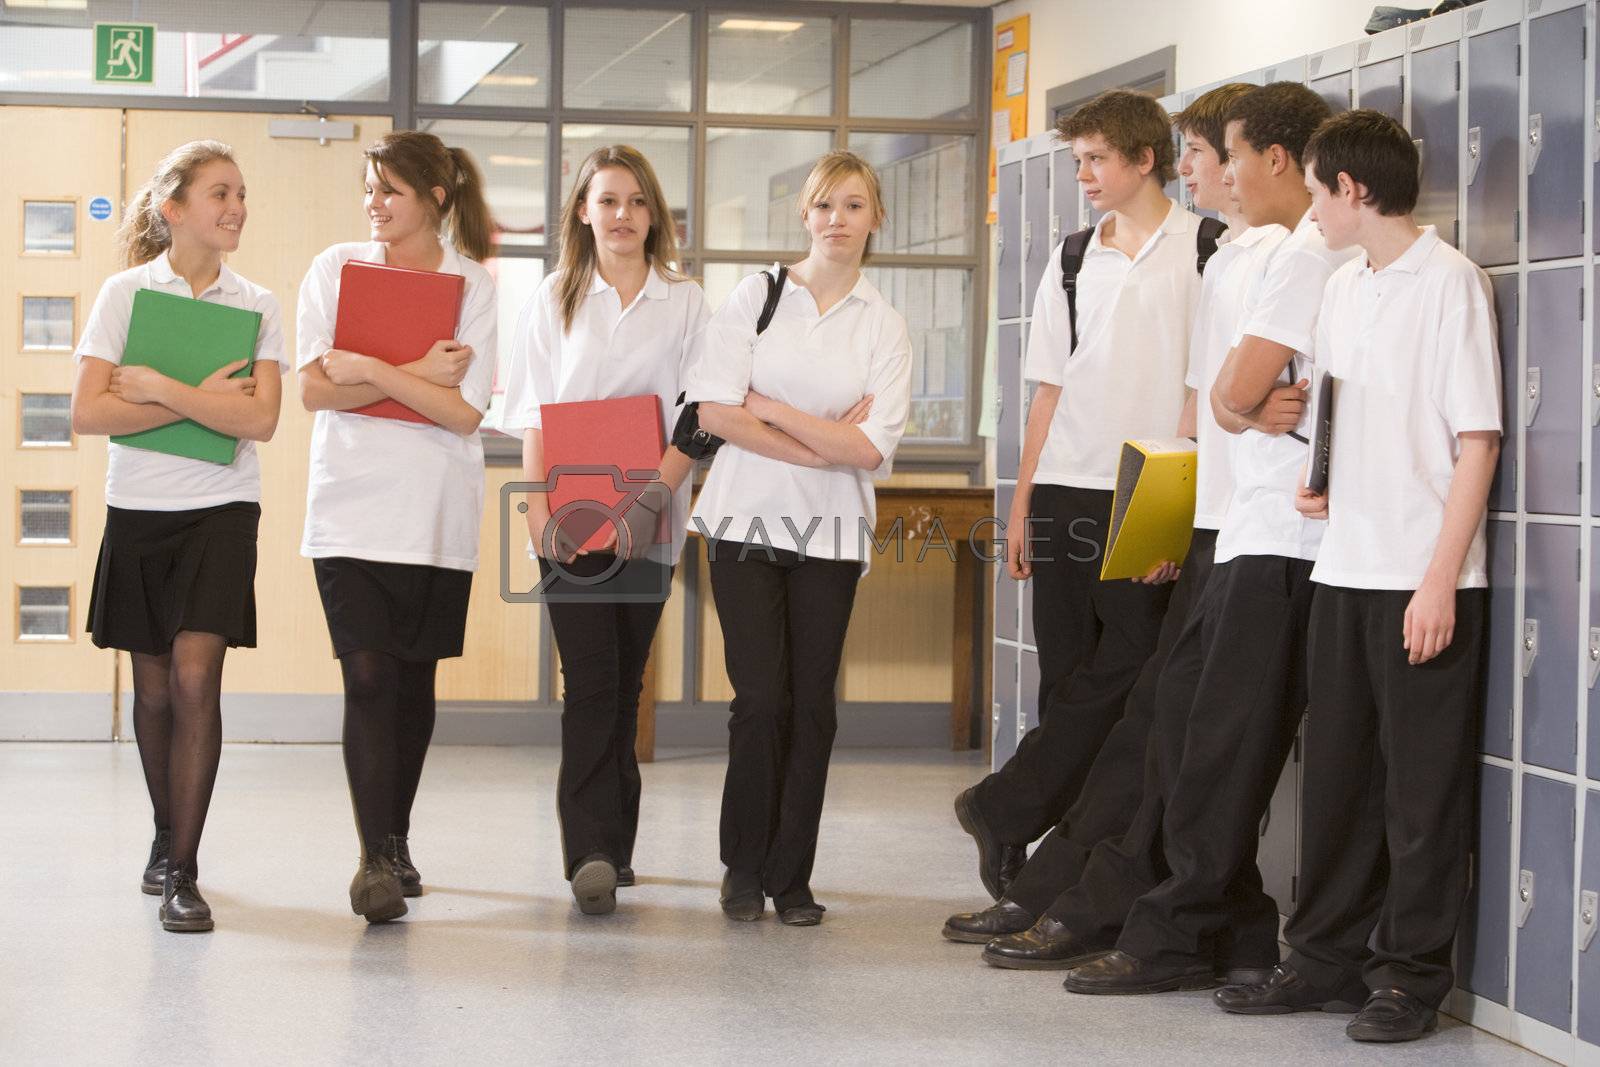 Royalty free image of Secondary school students in a school hallway  by MonkeyBusiness